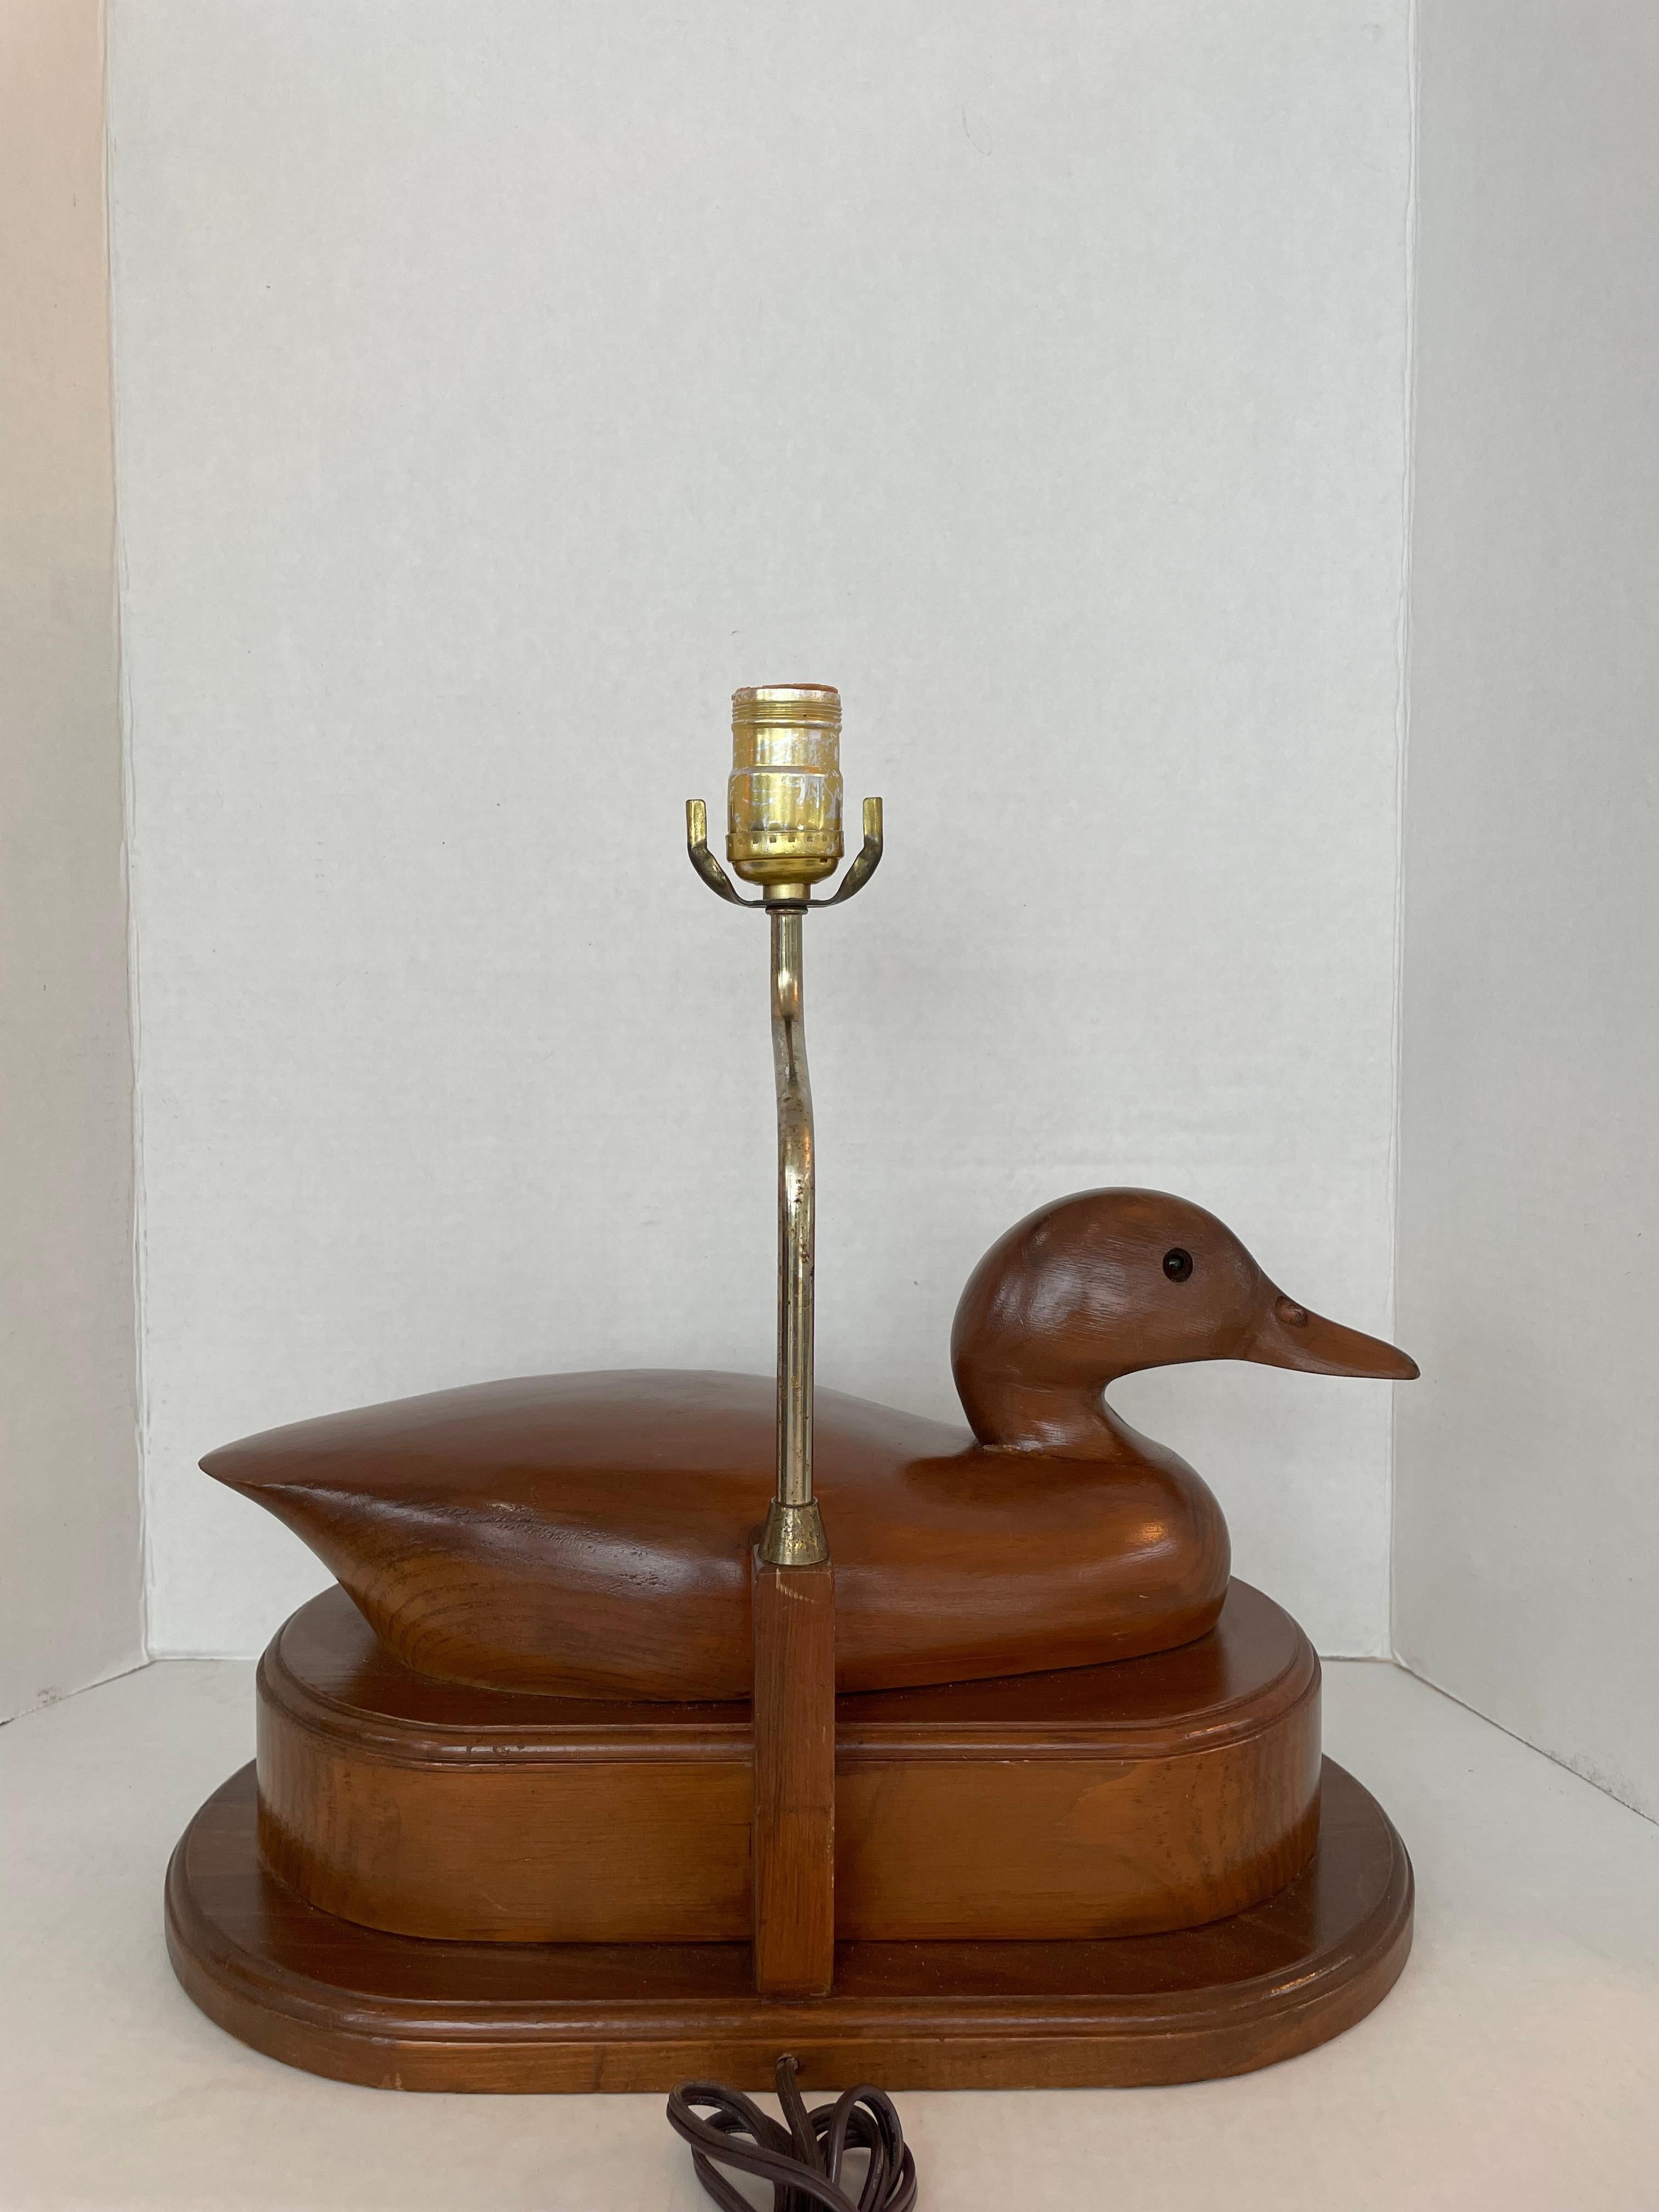 This stylish and chic hand-carved wood duck decoy lamp will make a subtle statement with its form and use of materials.  The piece was created by Cornwall Wood Products in Paris, Maine. 

Note: Dimensions of the duck itself are 5.50